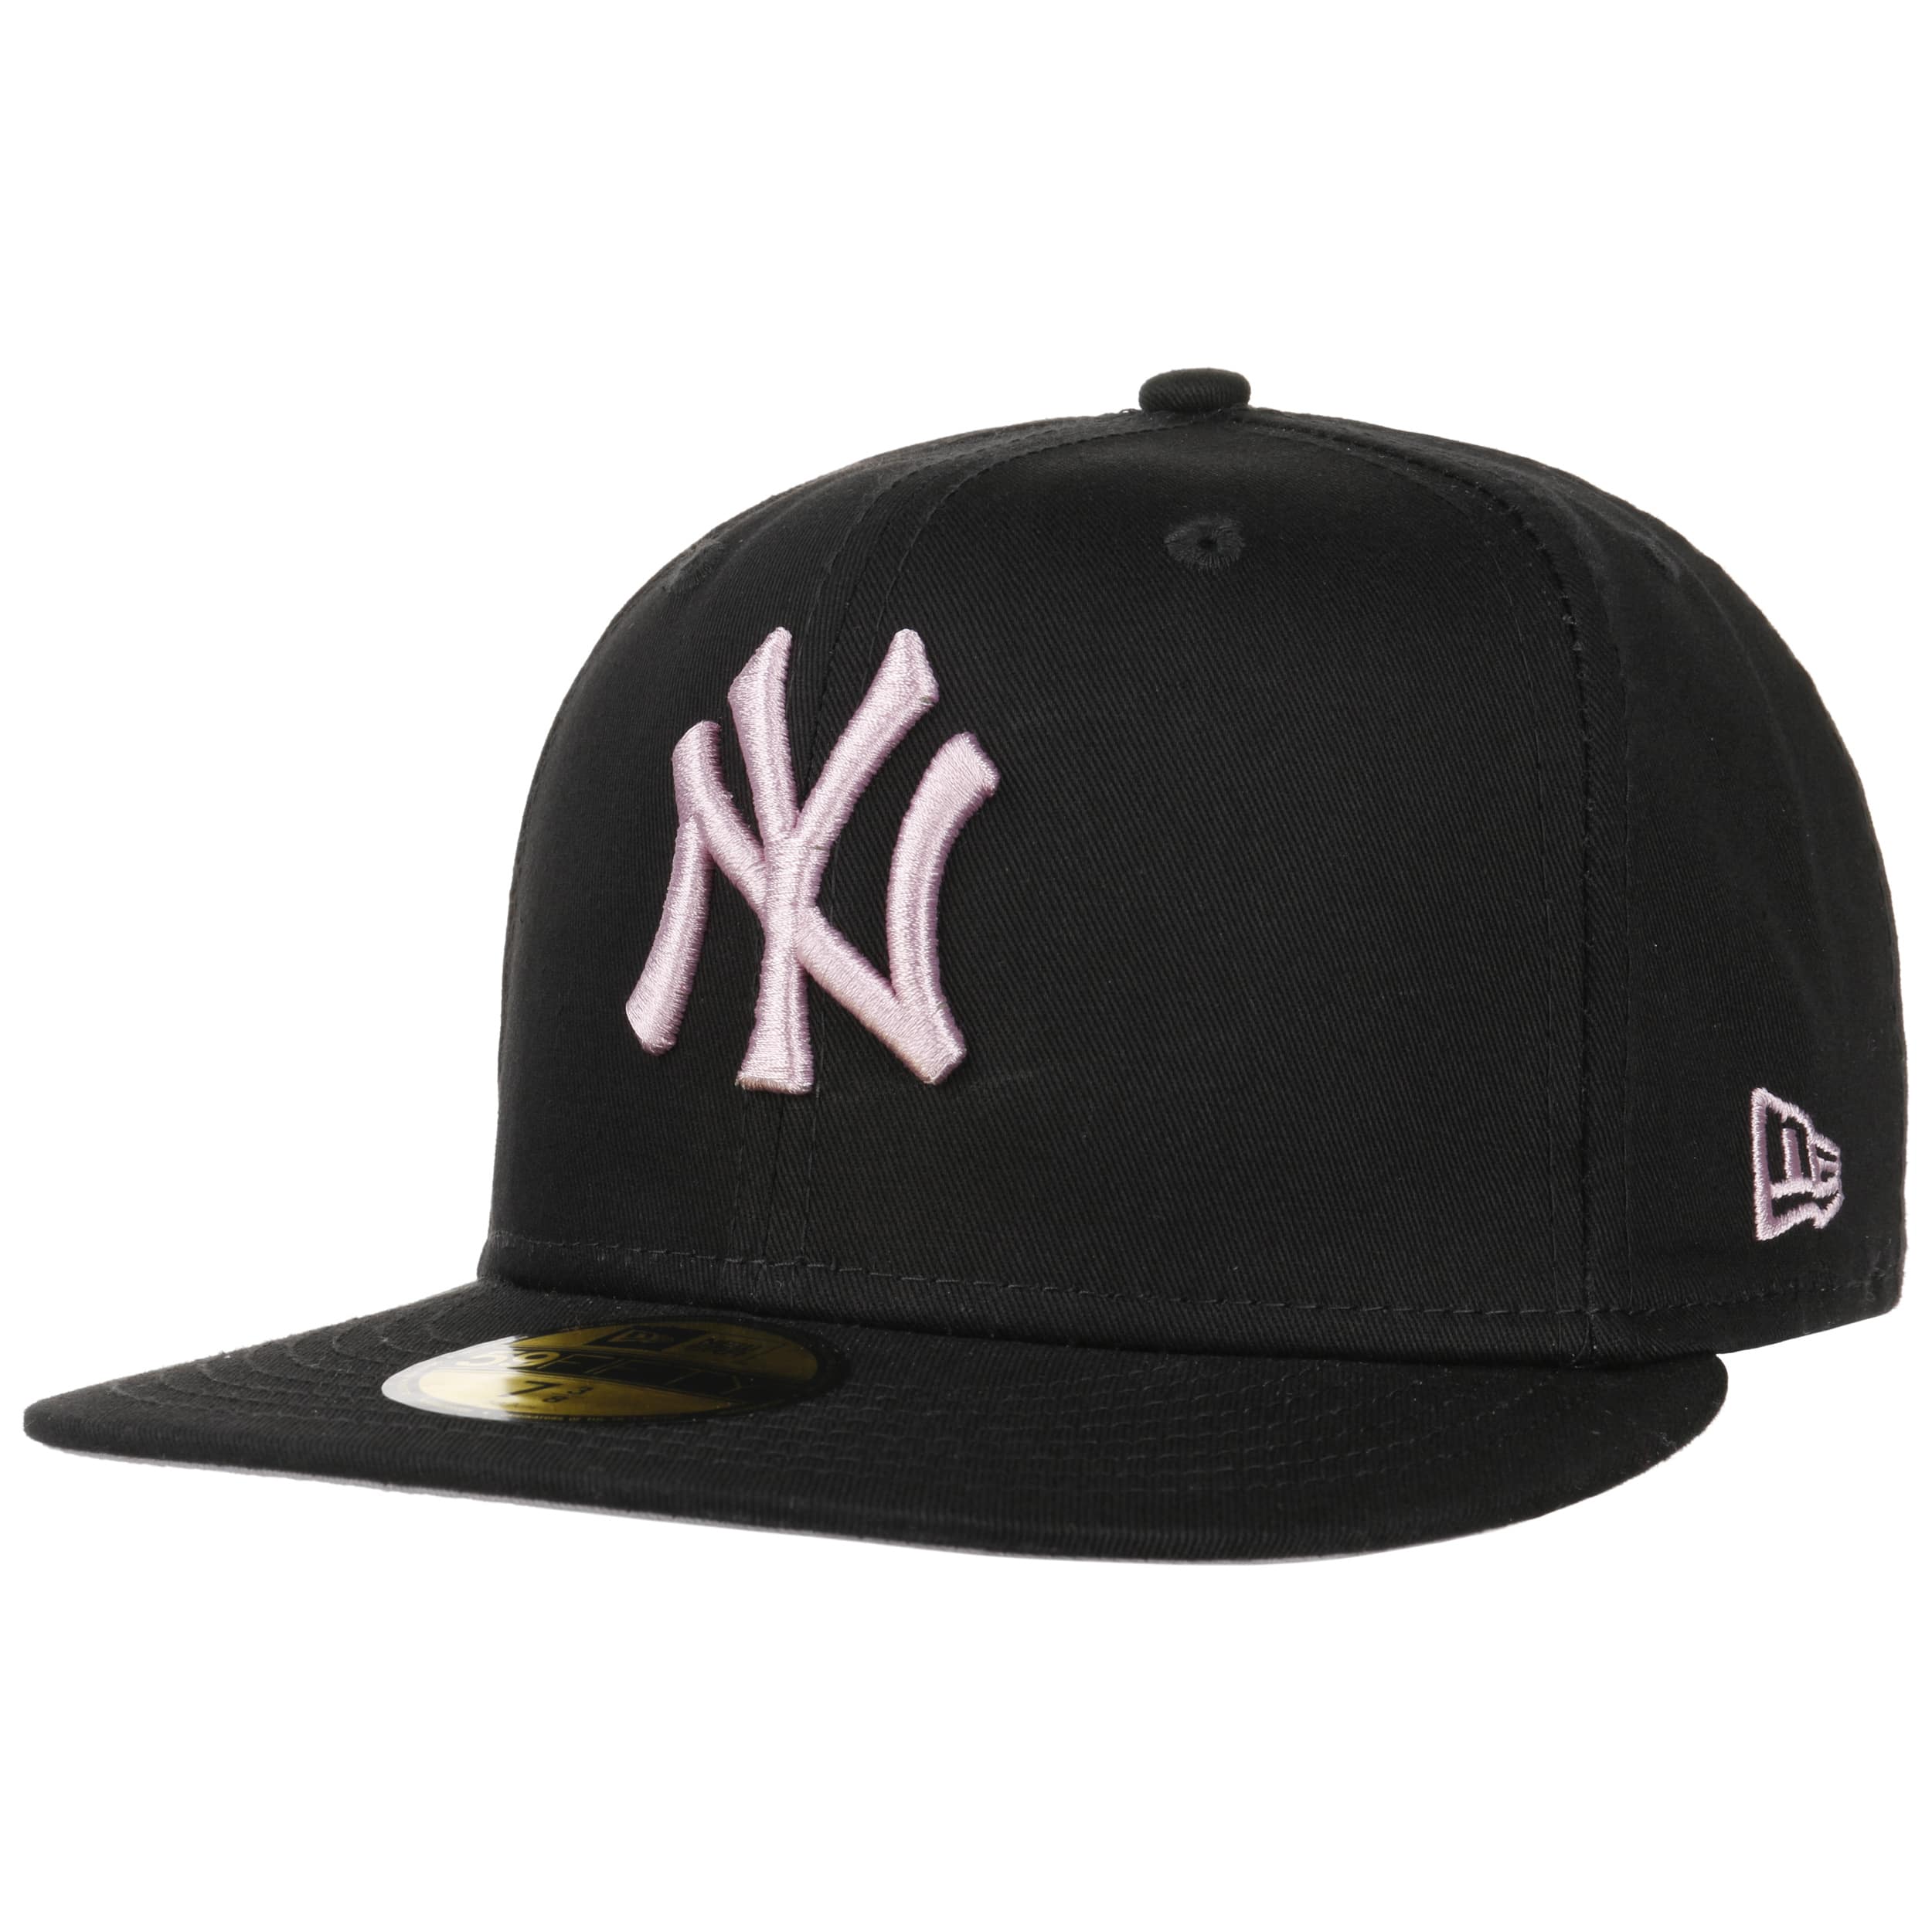 59Fifty Twotone Yankees Cap by New Era - 46,95 €